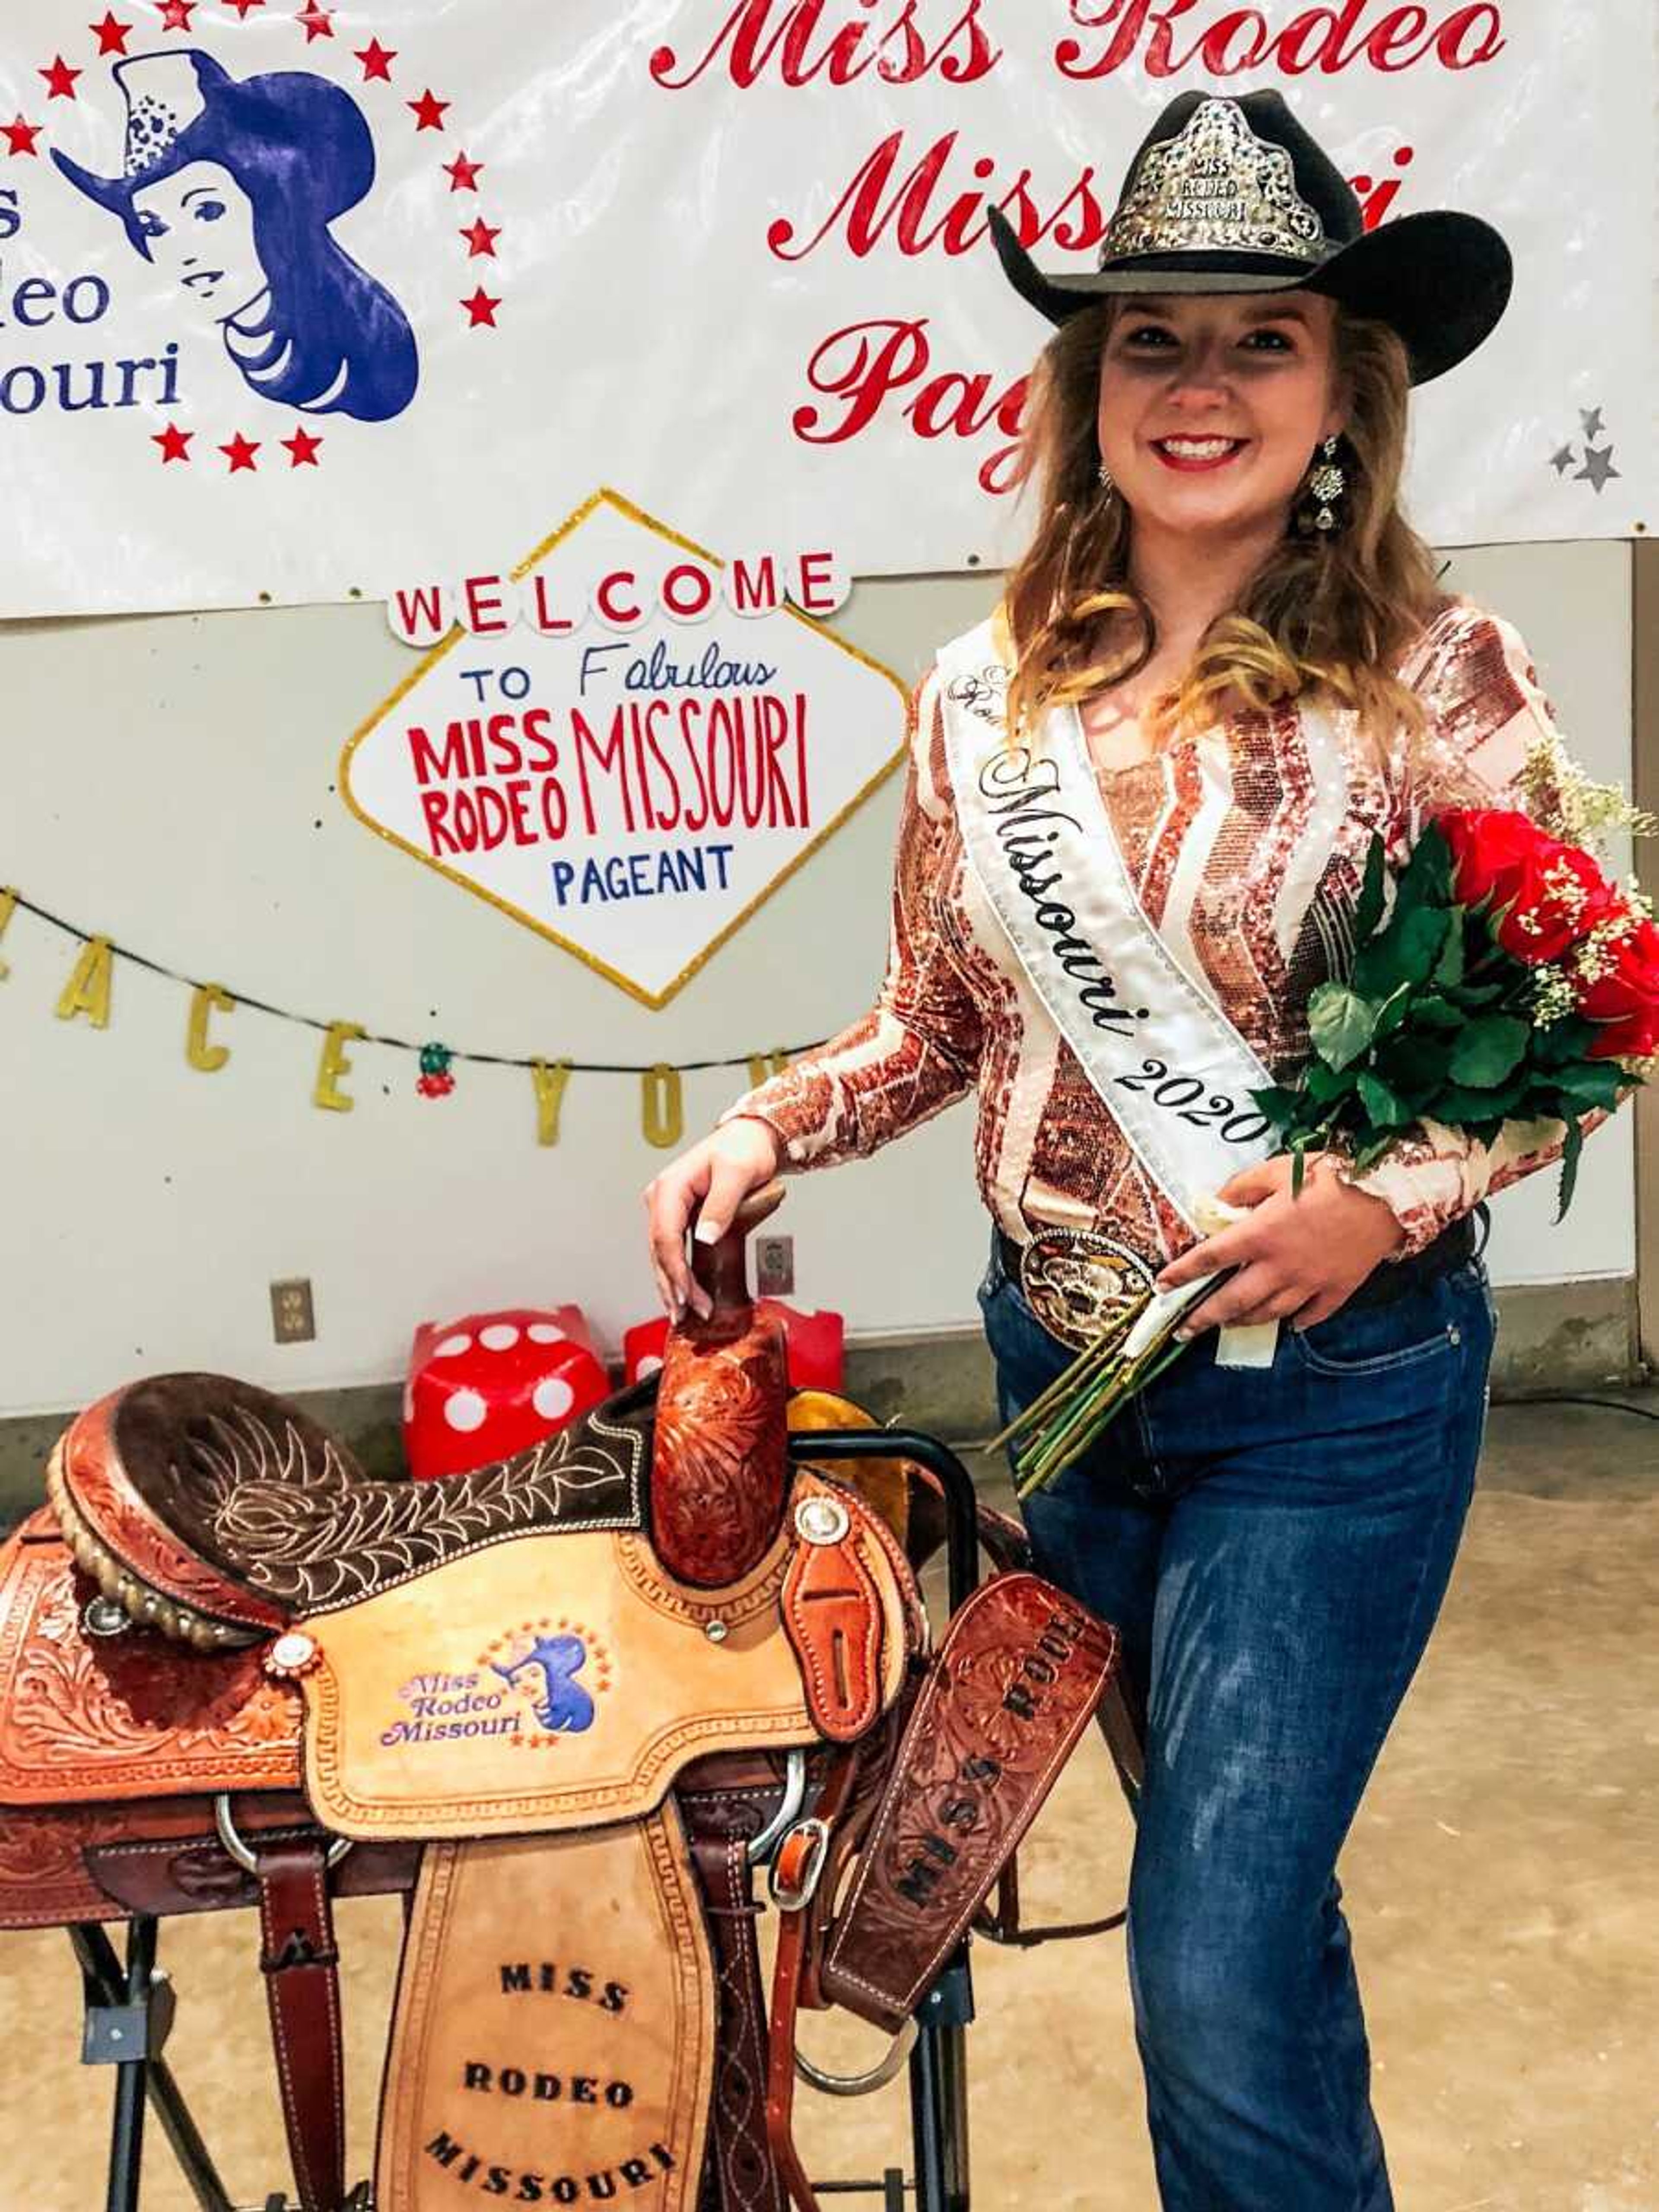 All hail the Queen; Southeast student wins Miss Rodeo Missouri title